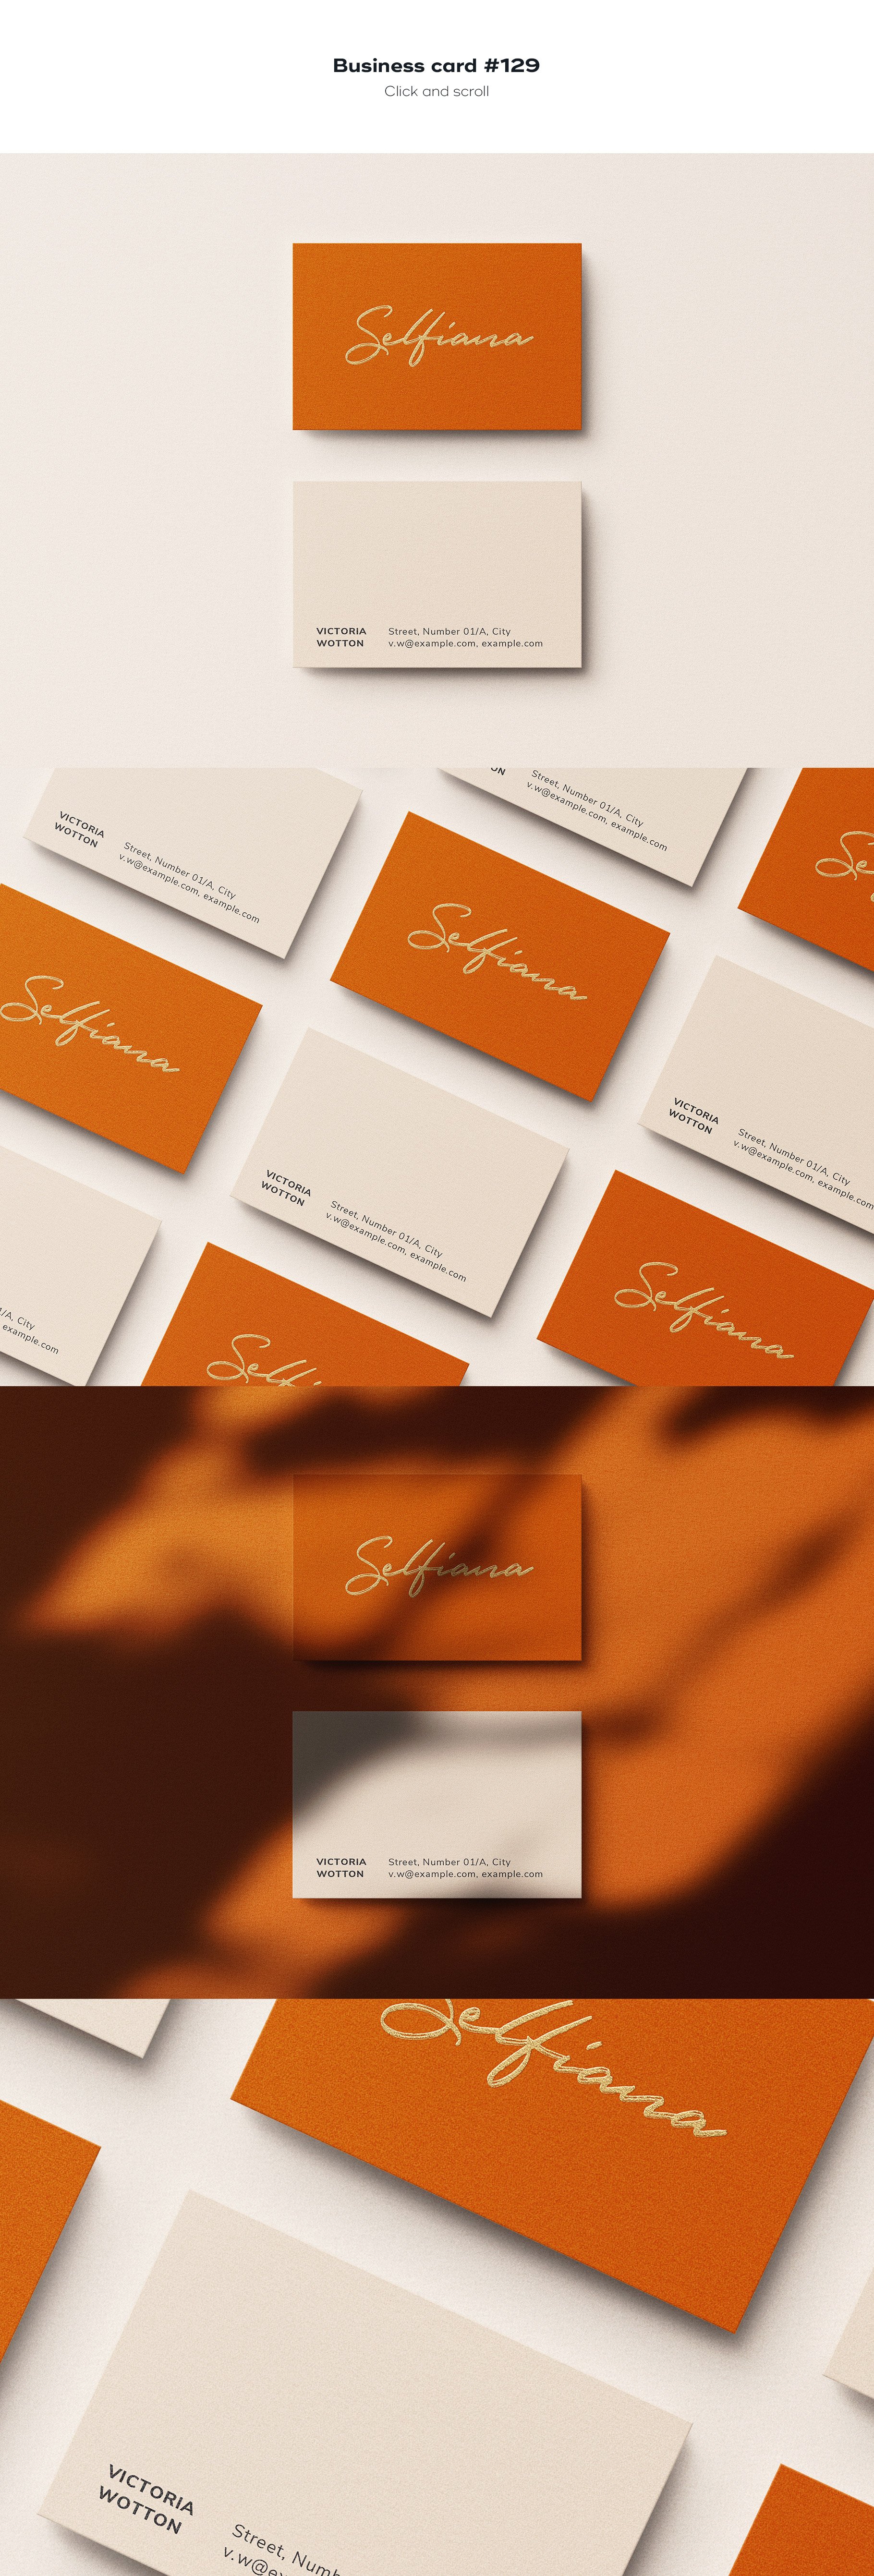 business card 129 601